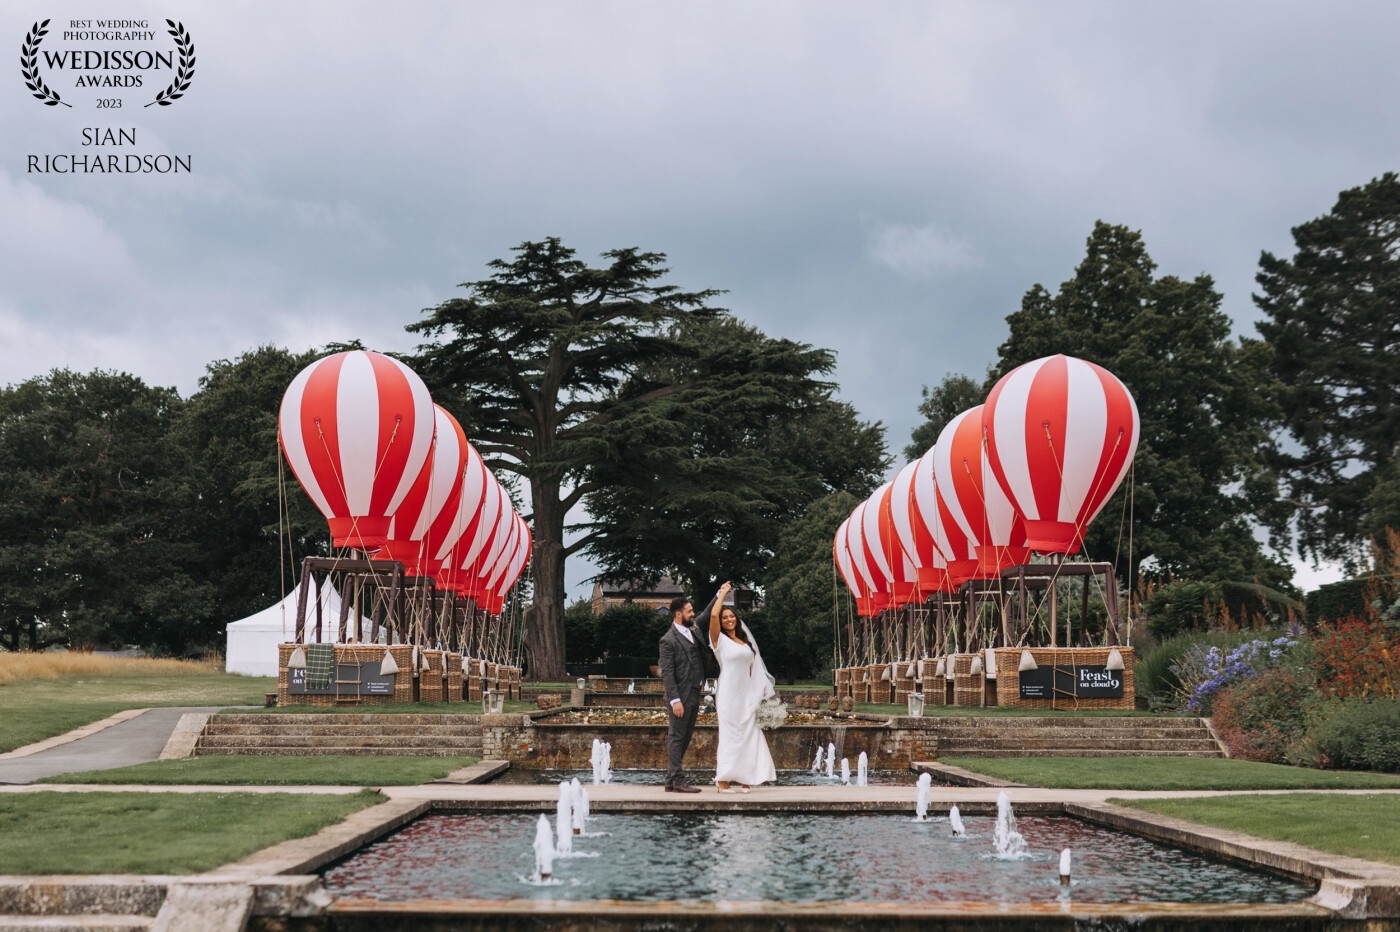 It was all about the symmetry of the balloons for this image and then everything else like the ripple reflection in the water, the water fountains and slightly moody sky just made it even more extra. We were so lucky to have a moment when no hotel guests were out by this area as well.